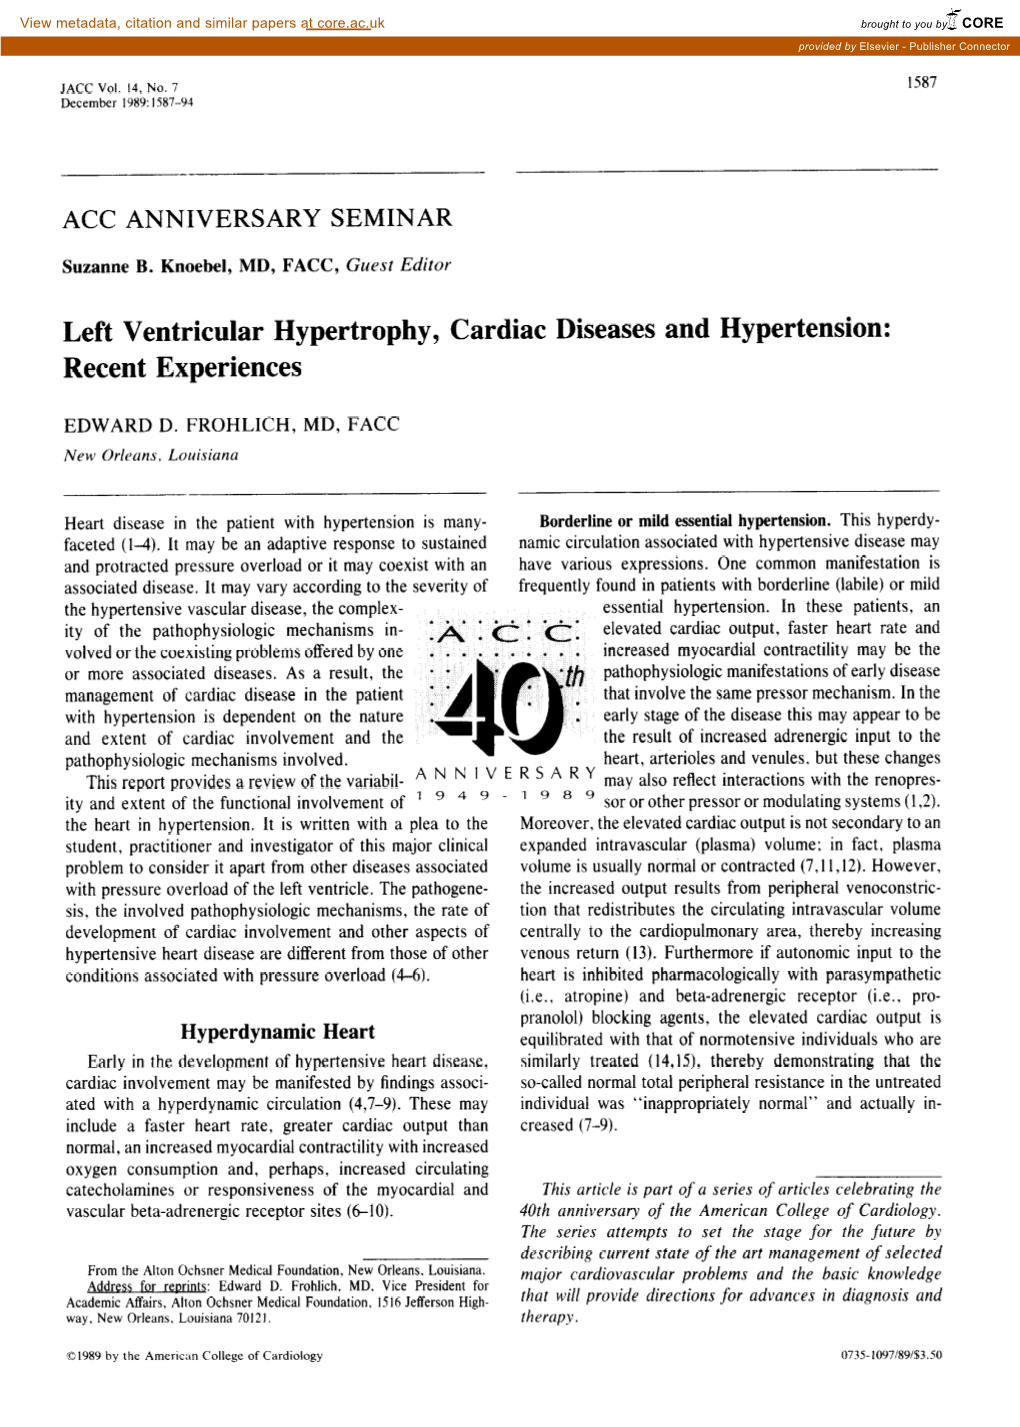 Left Ventricular Hypertrophy, Cardiac Diseases and Hypertension: Recent Experiences